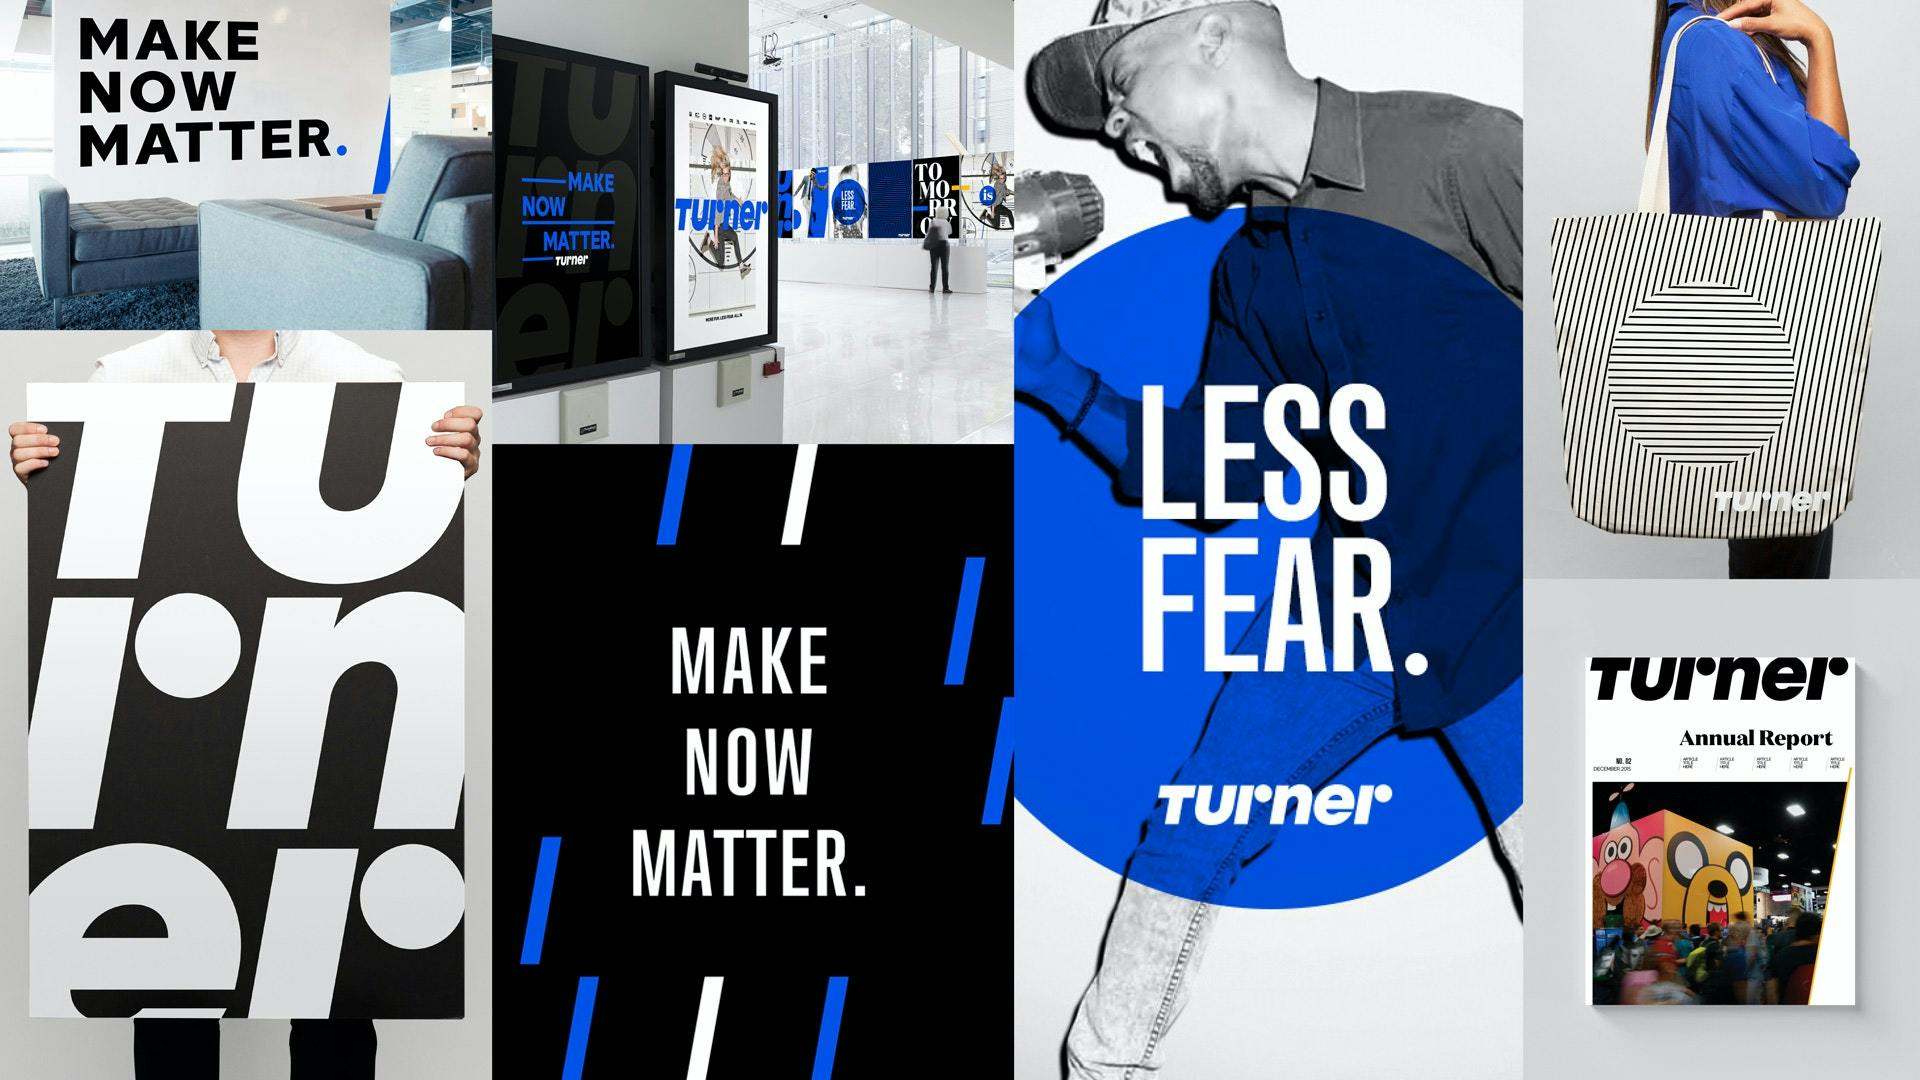 An ad for Turner